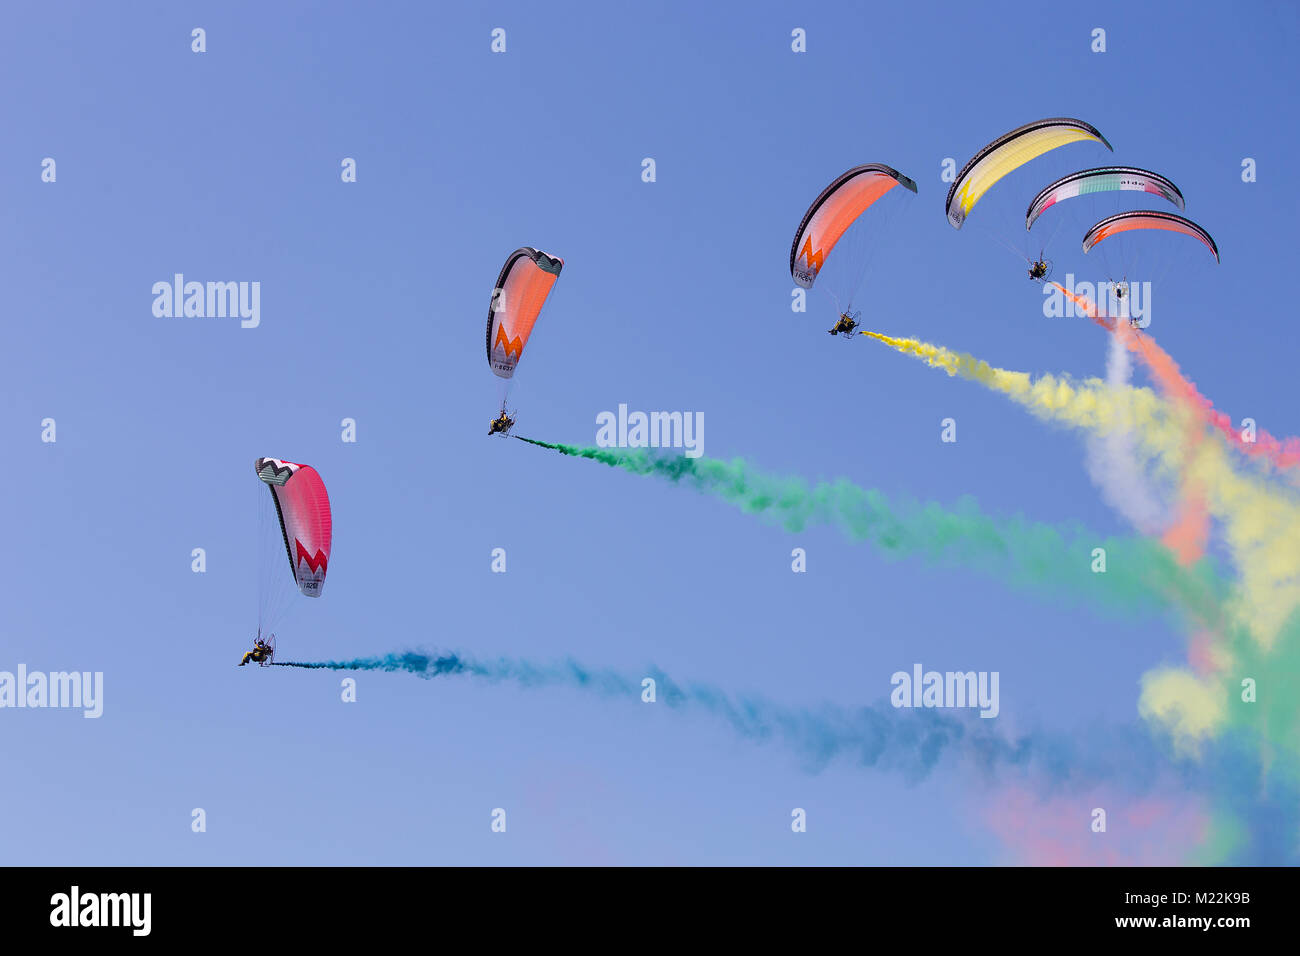 Airshow exibition of multicolored powered parachutes. Paratroopers during the air performance with trail of italian flag colors in the clear blue sky. Stock Photo